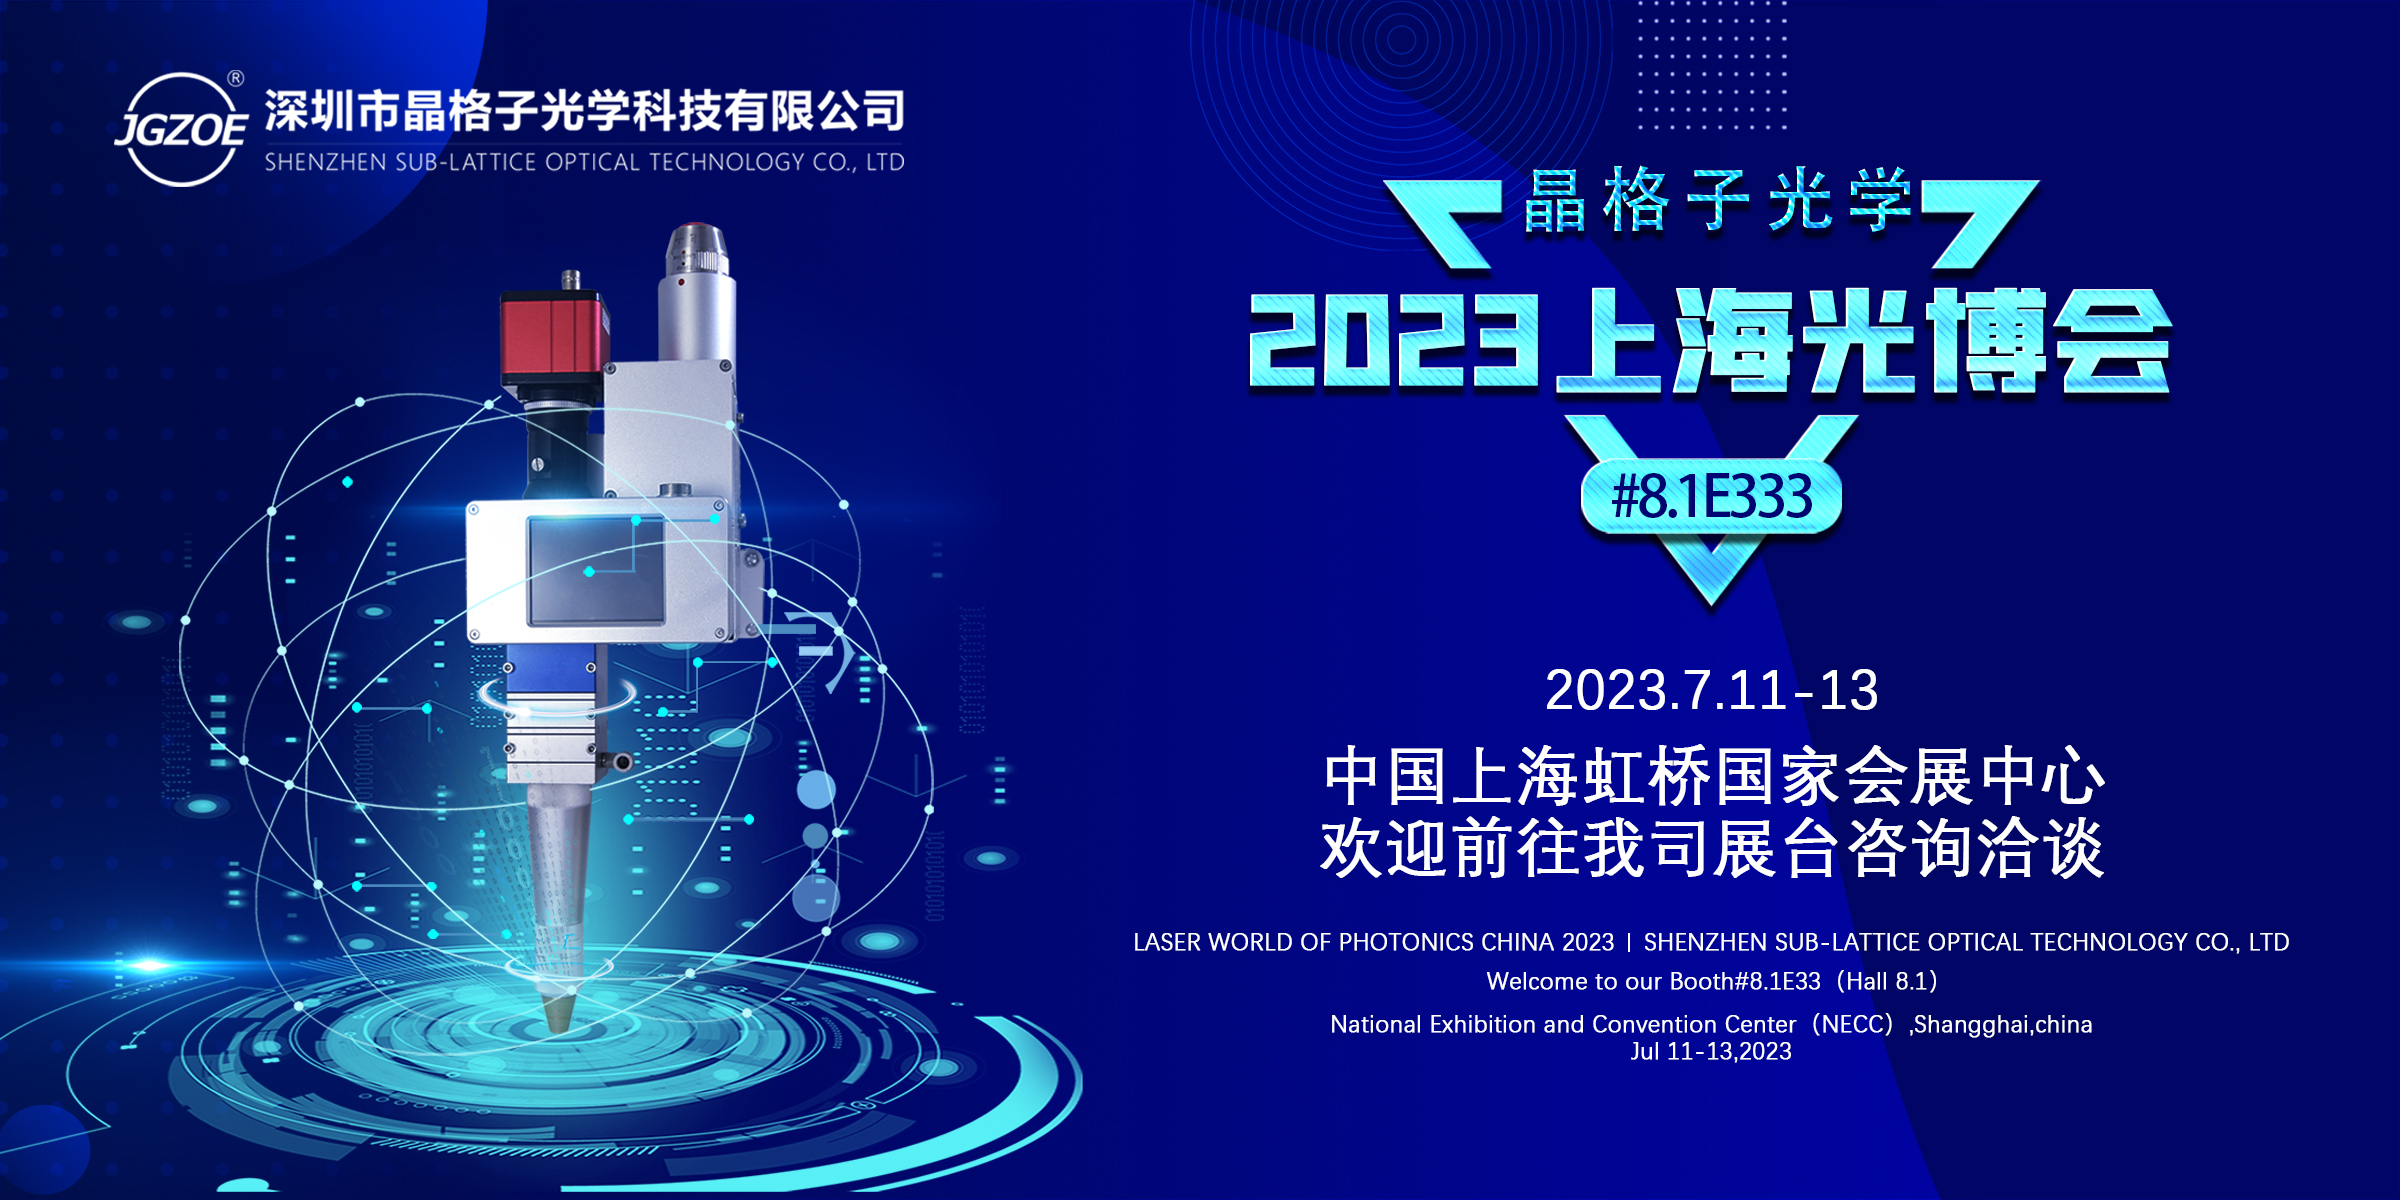 We will Attend Laser World of Photonics Shanghai in July, 2023